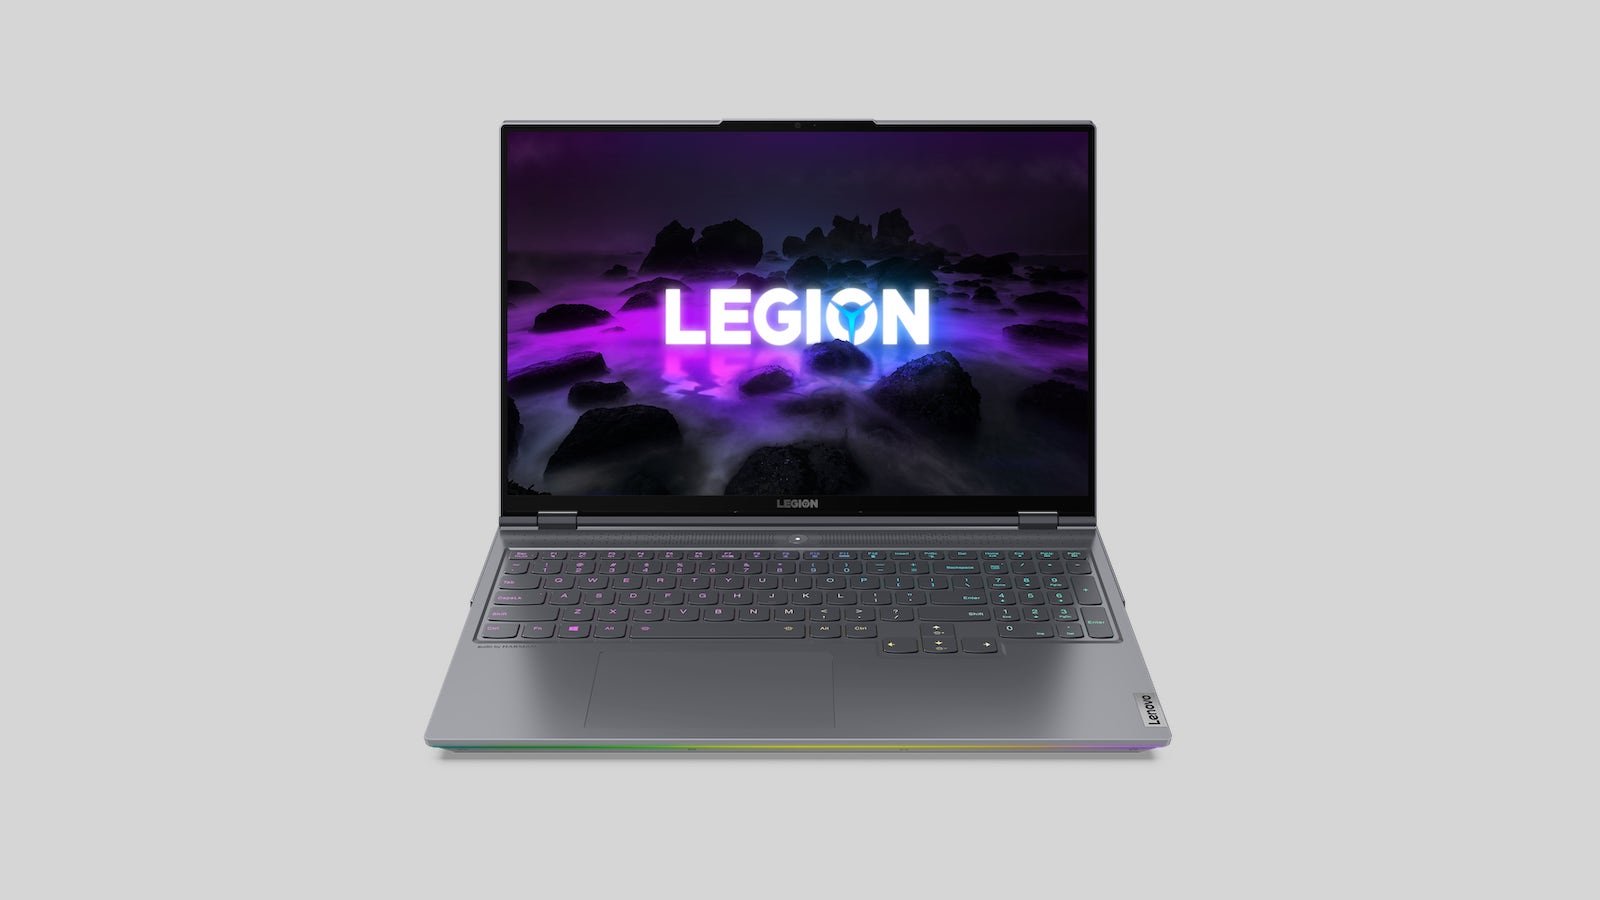 Lenovo Legion 2021 gaming laptop series includes four new models that use AI